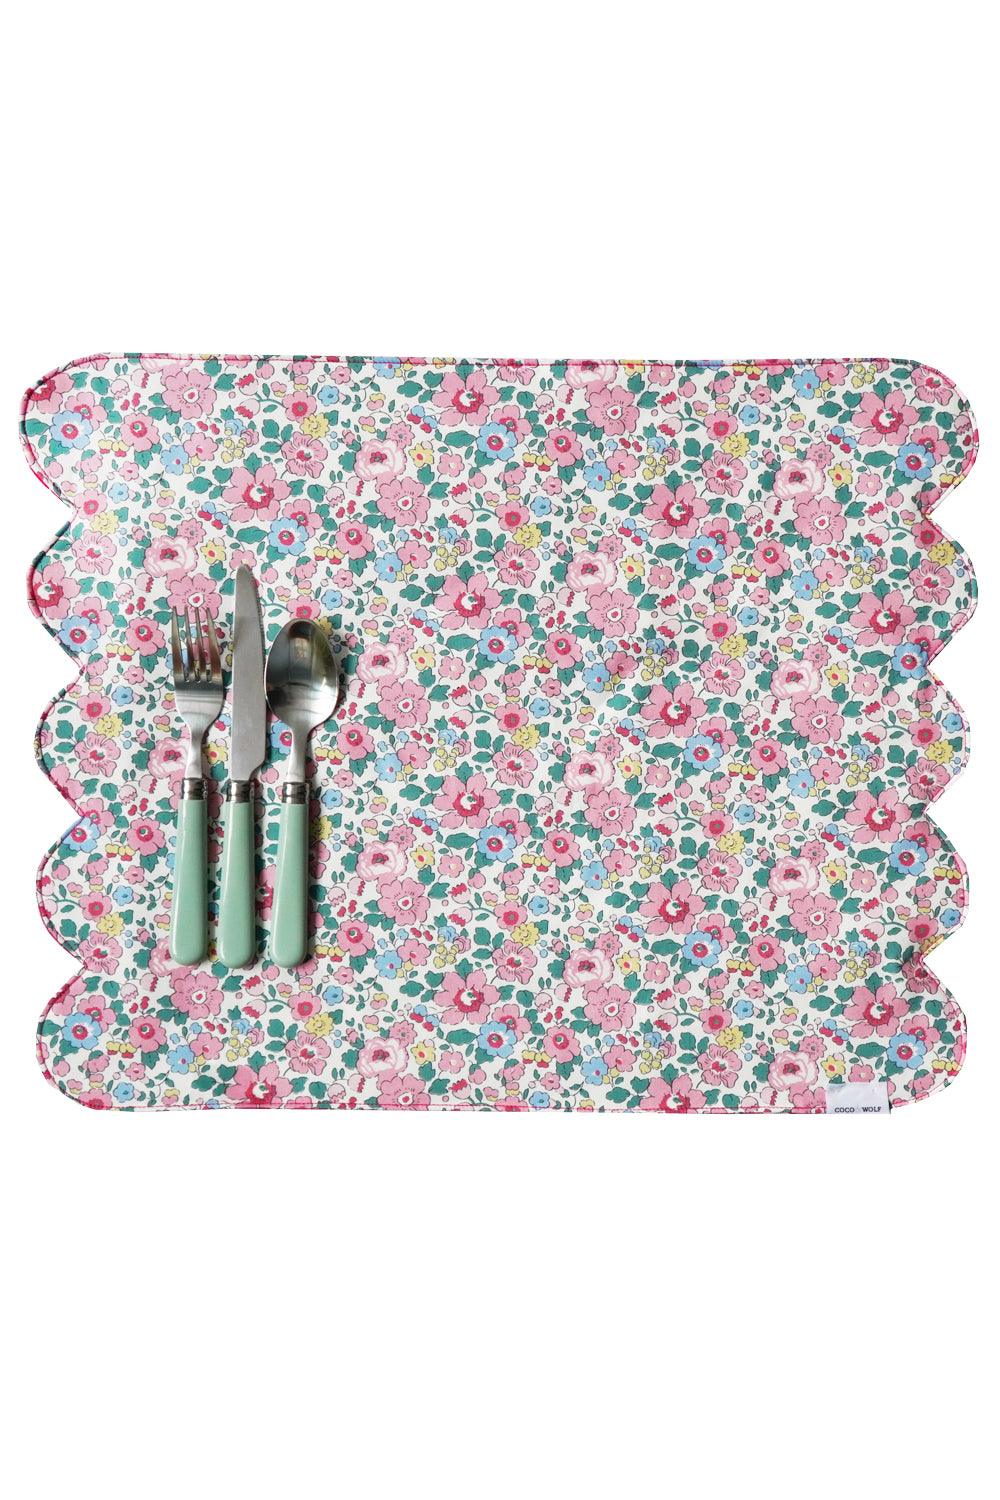 Reversible Cloud Placemat made with Liberty Fabric BETSY CANDY FLOSS & CAPEL FUCHSIA PINK - Coco & Wolf